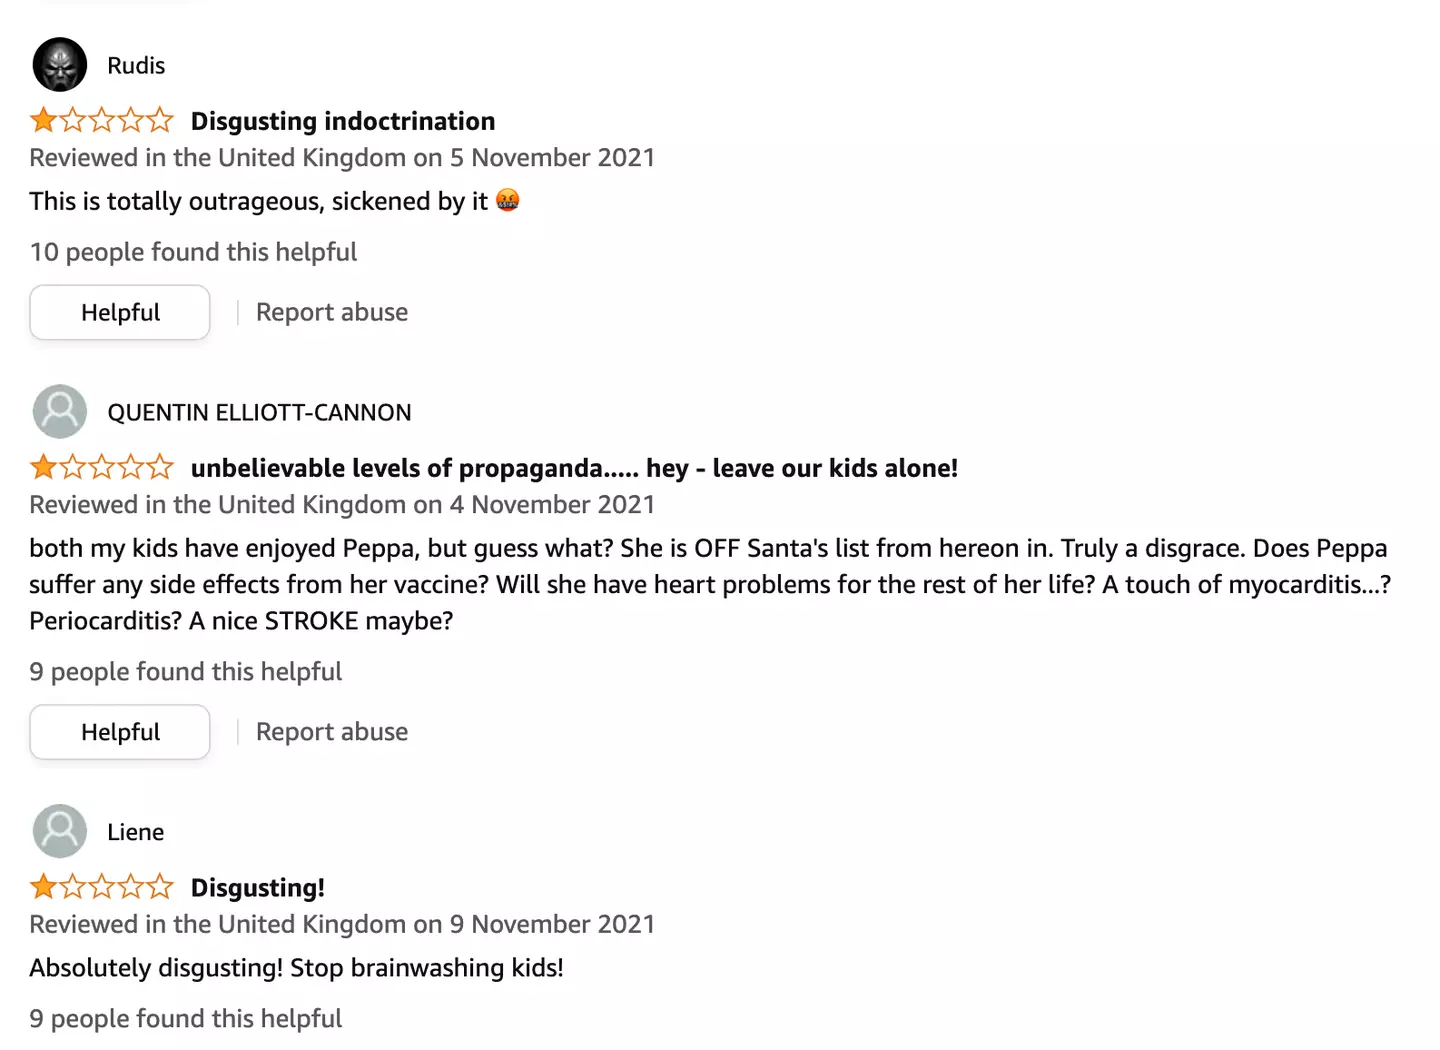 A sample of some of the reviews left on Amazon.